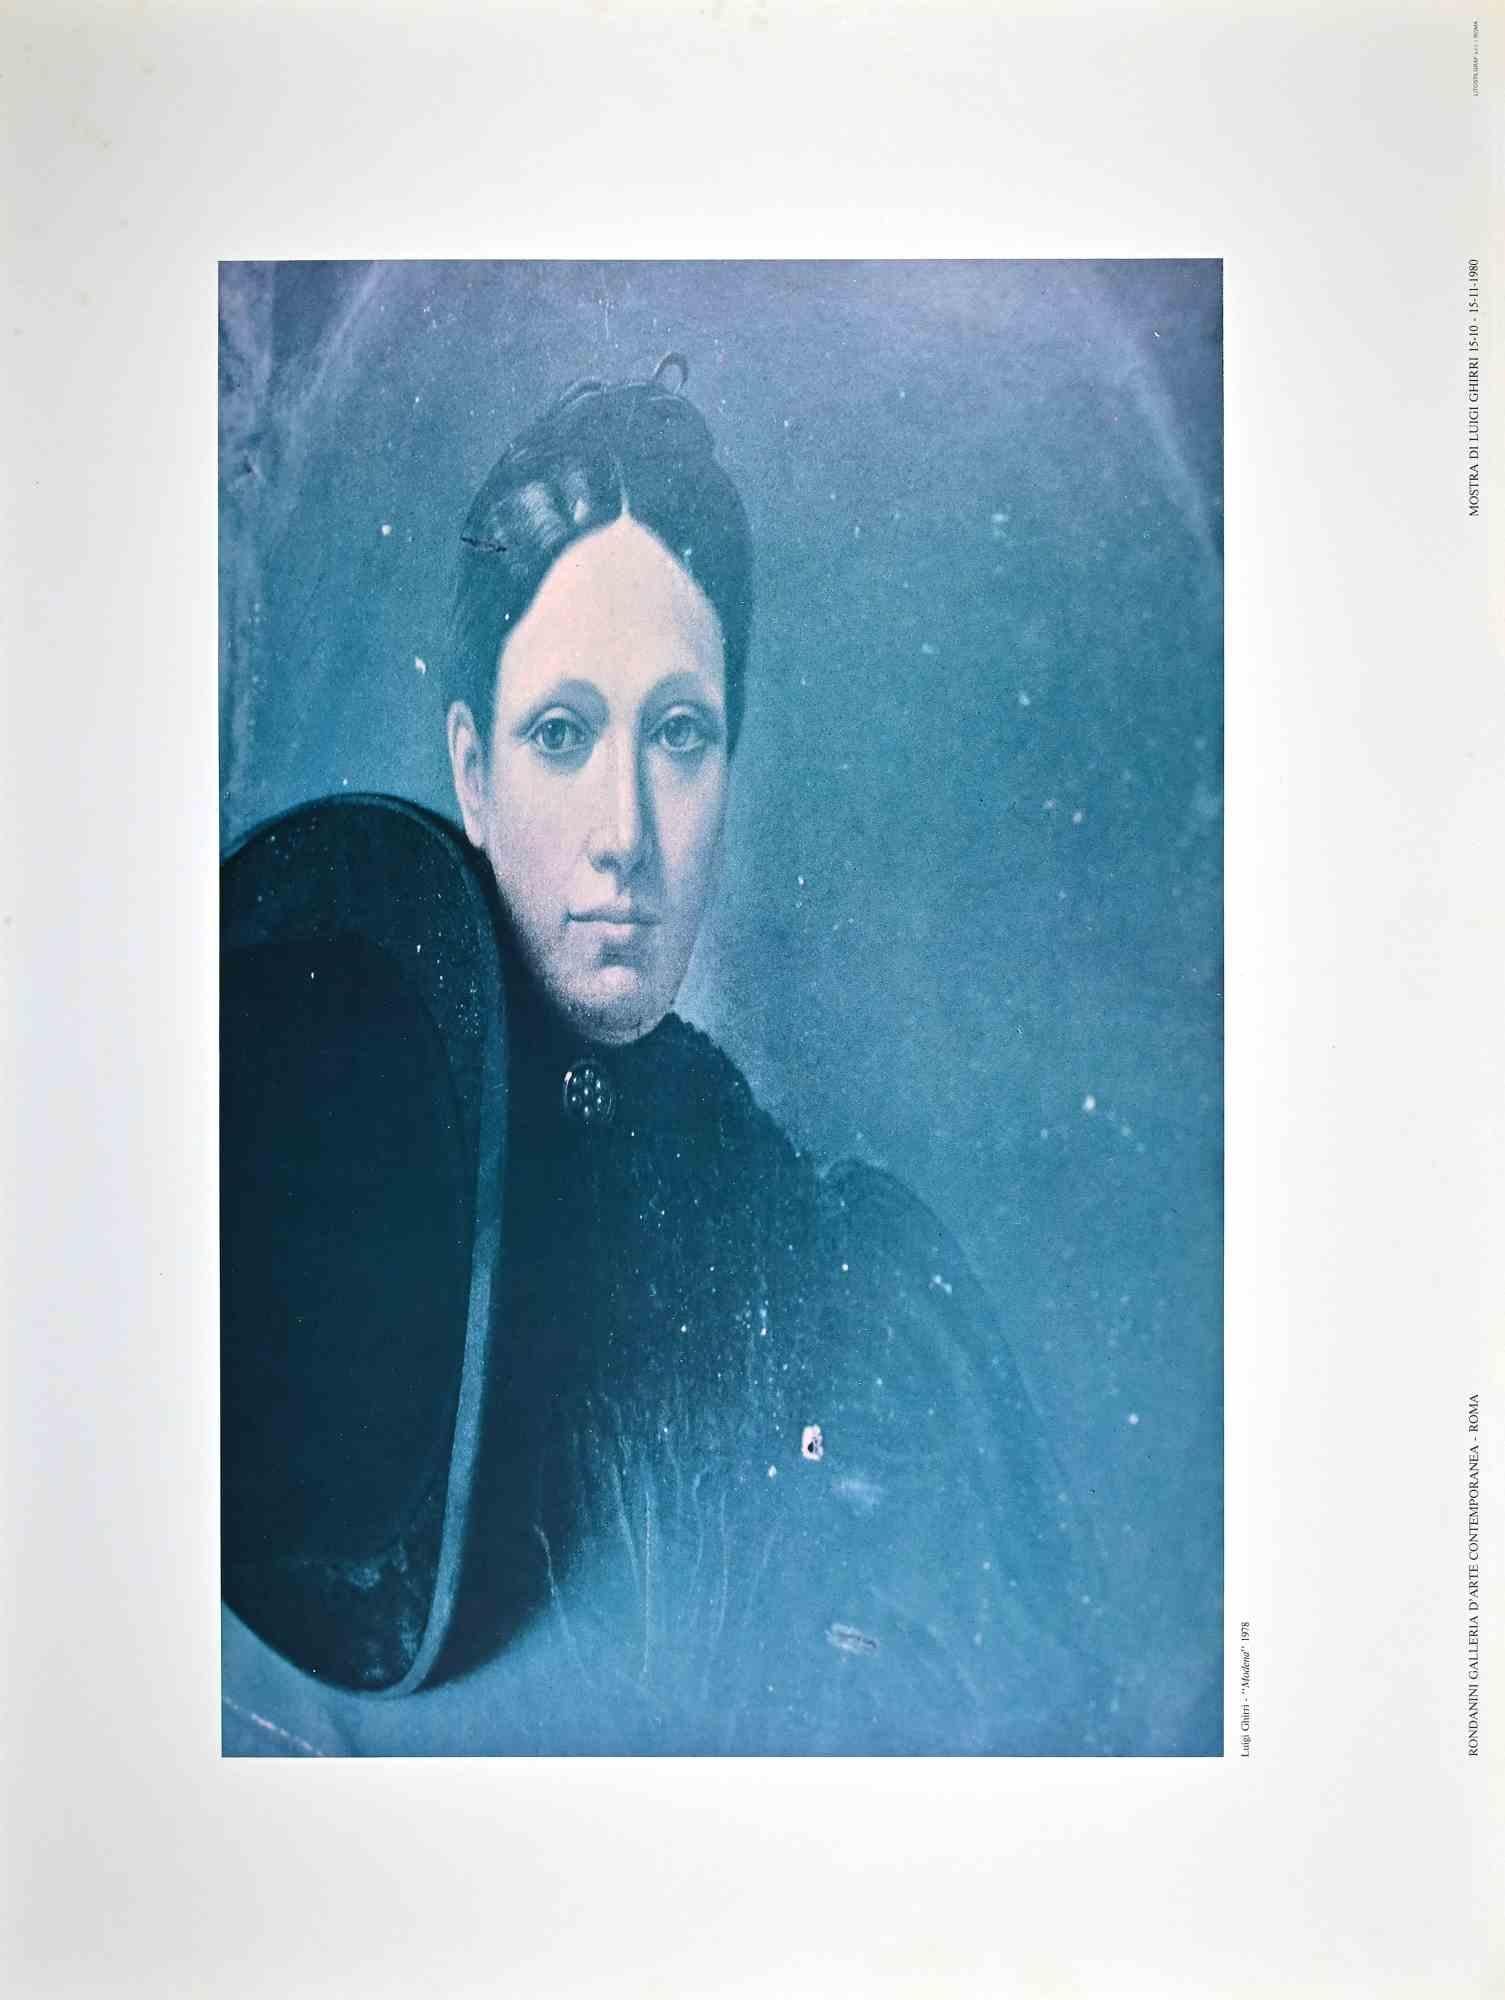 Modena is an original offset print by Luigi Ghirri.

The artwork is the offset poster of the exhibition held by the artist at  Rondanini Galleria  d'Arte Contemporanea in 1980. 

The offset shows the artwork Modena realized by the artist in 1978.